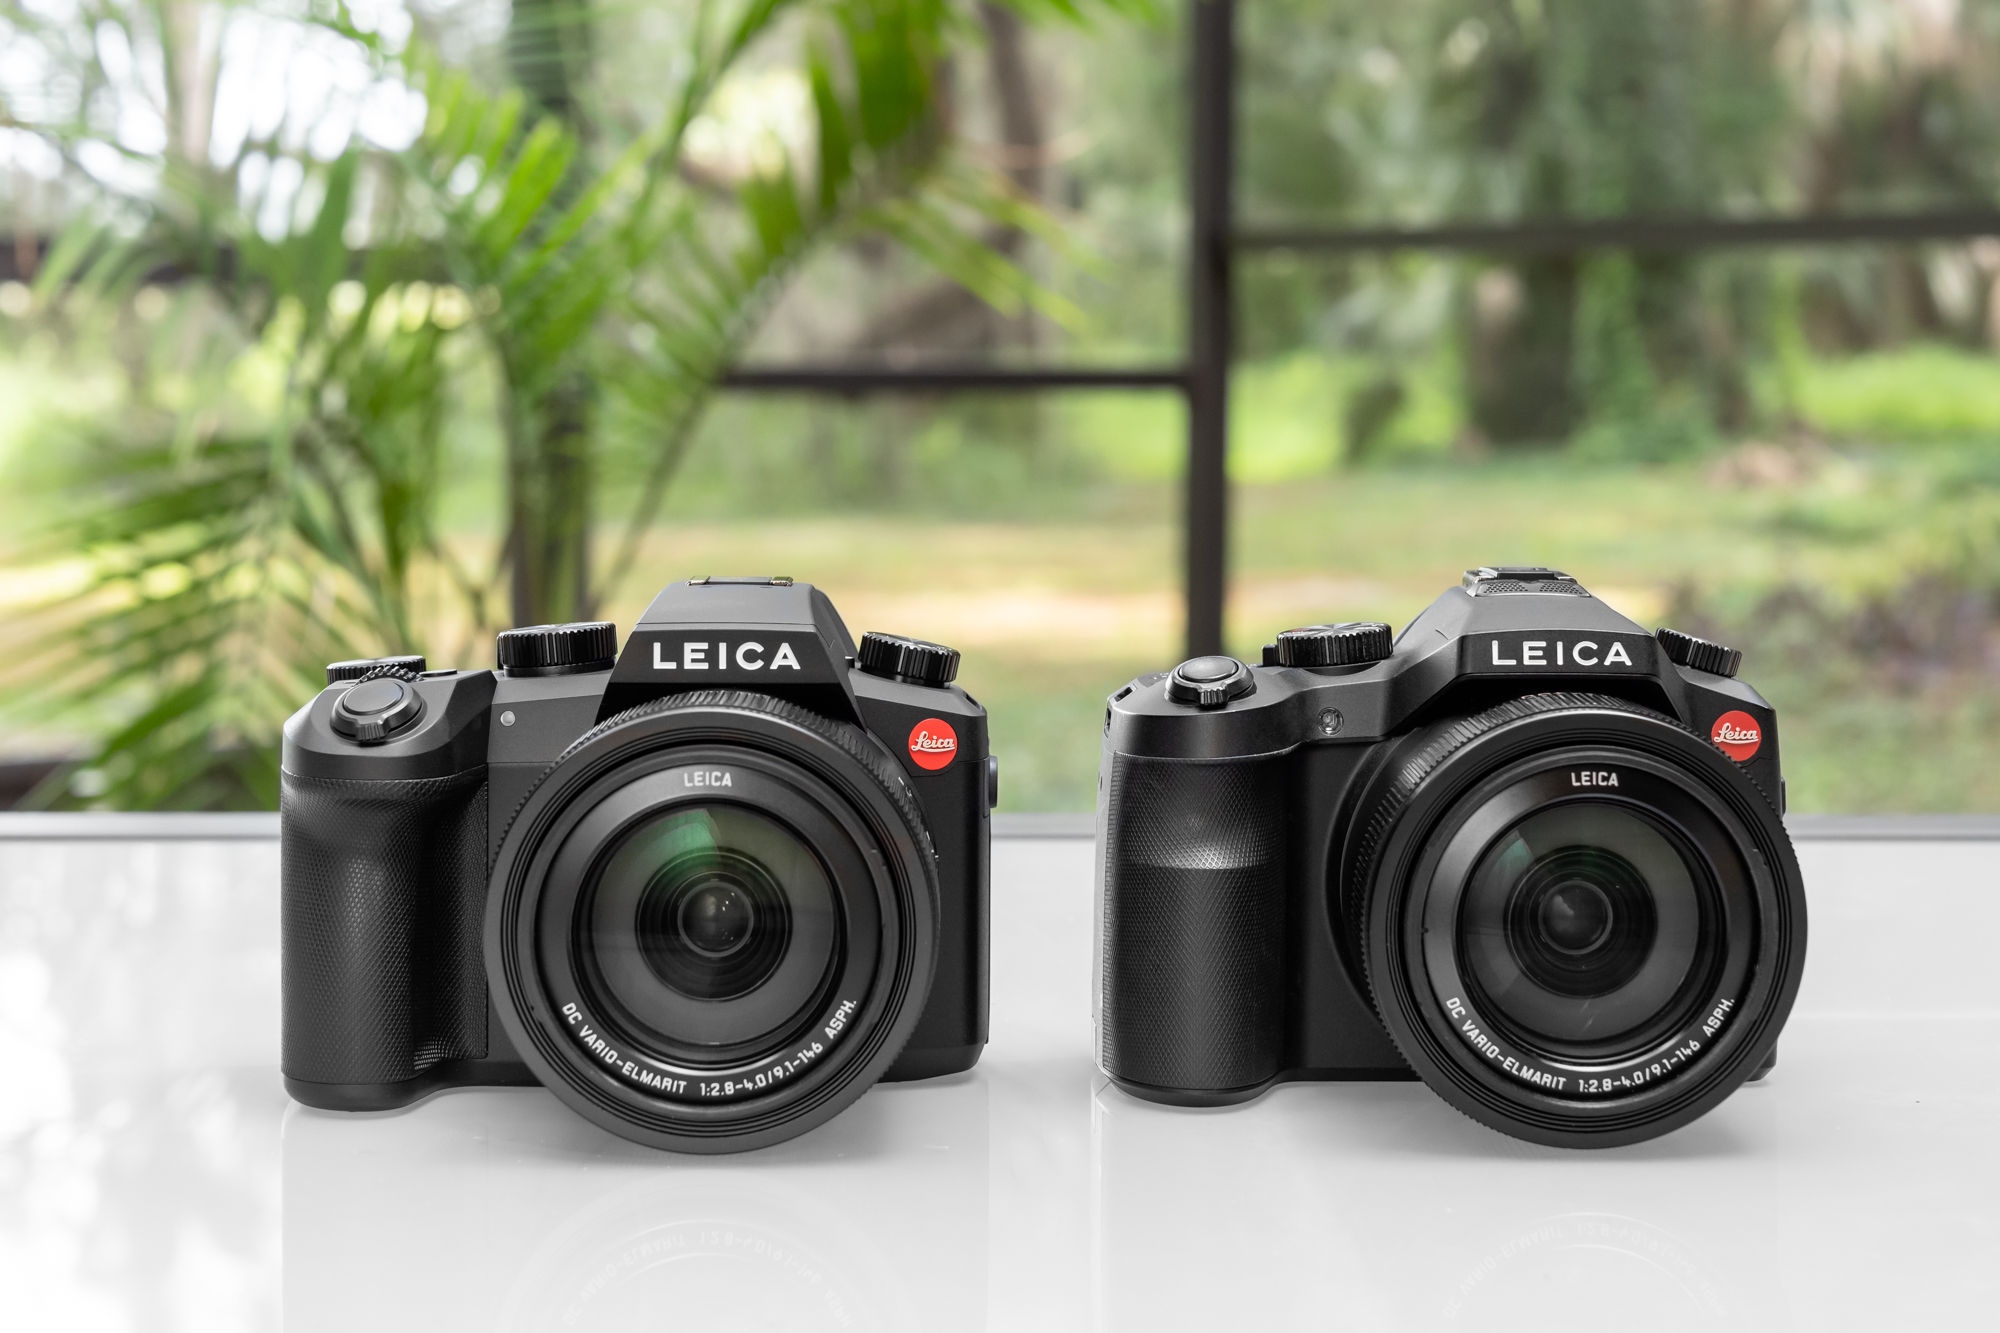 Leica D-Lux 2 Camera Review 